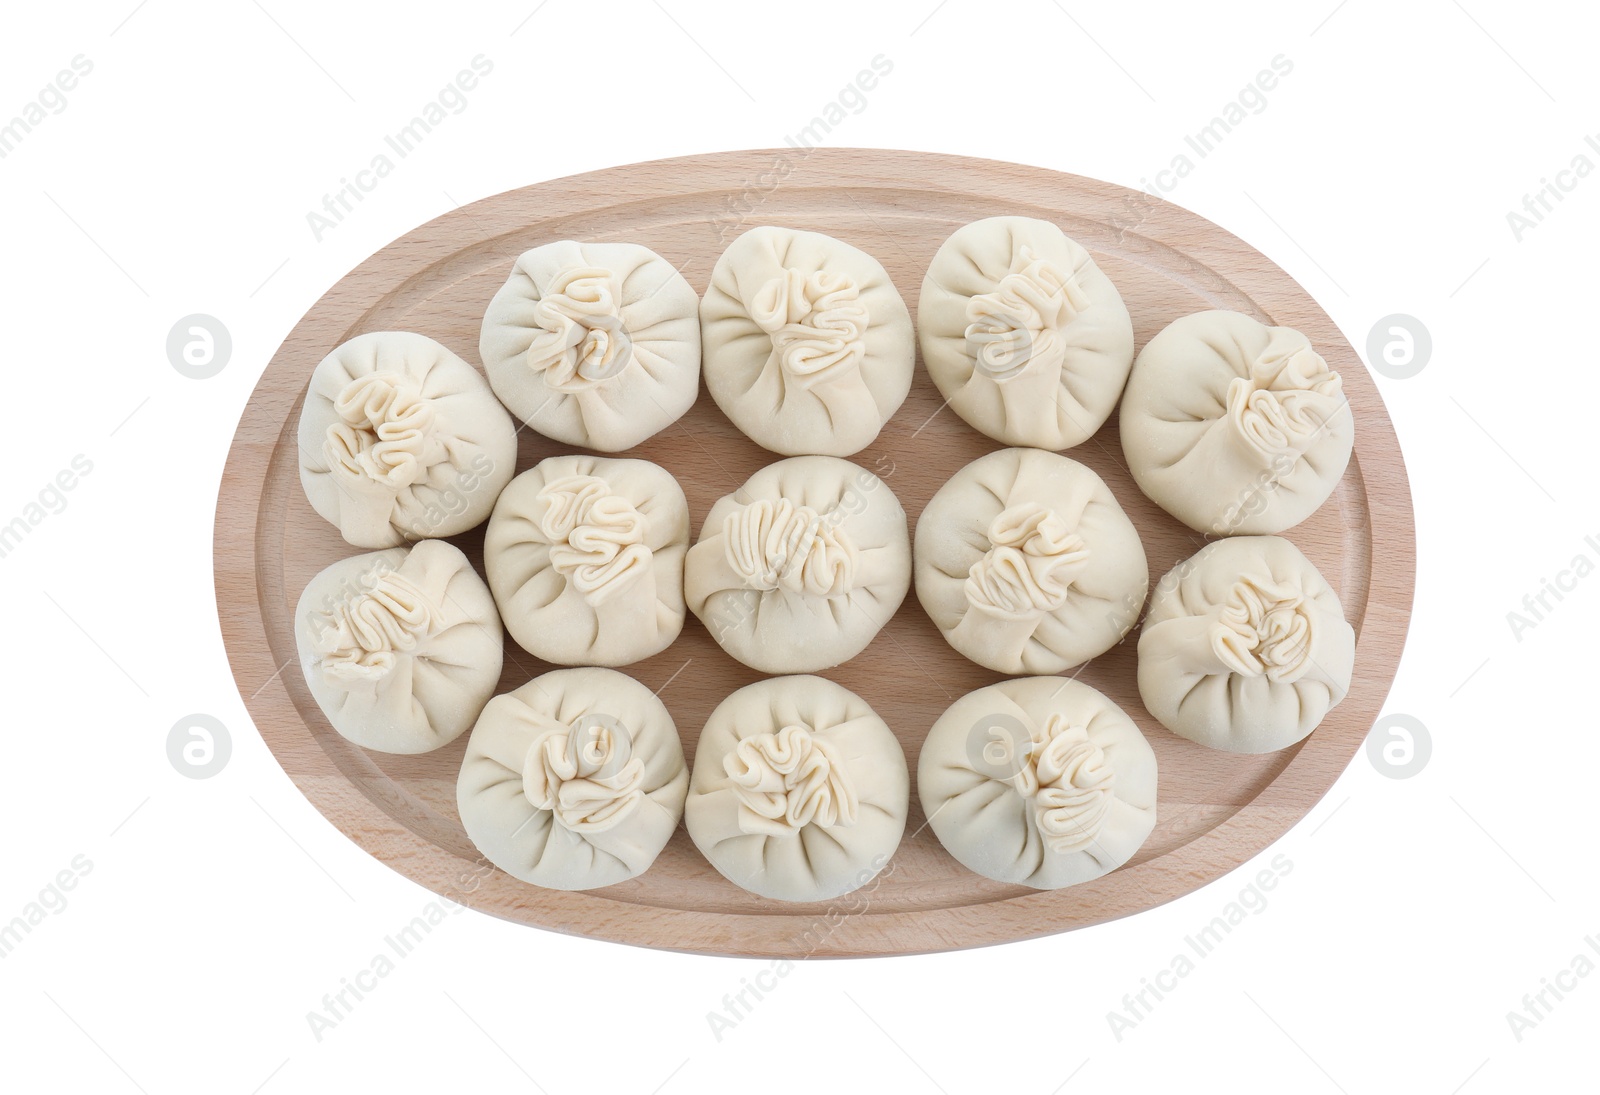 Photo of Board with uncooked khinkali (dumplings) isolated on white, top view. Georgian cuisine